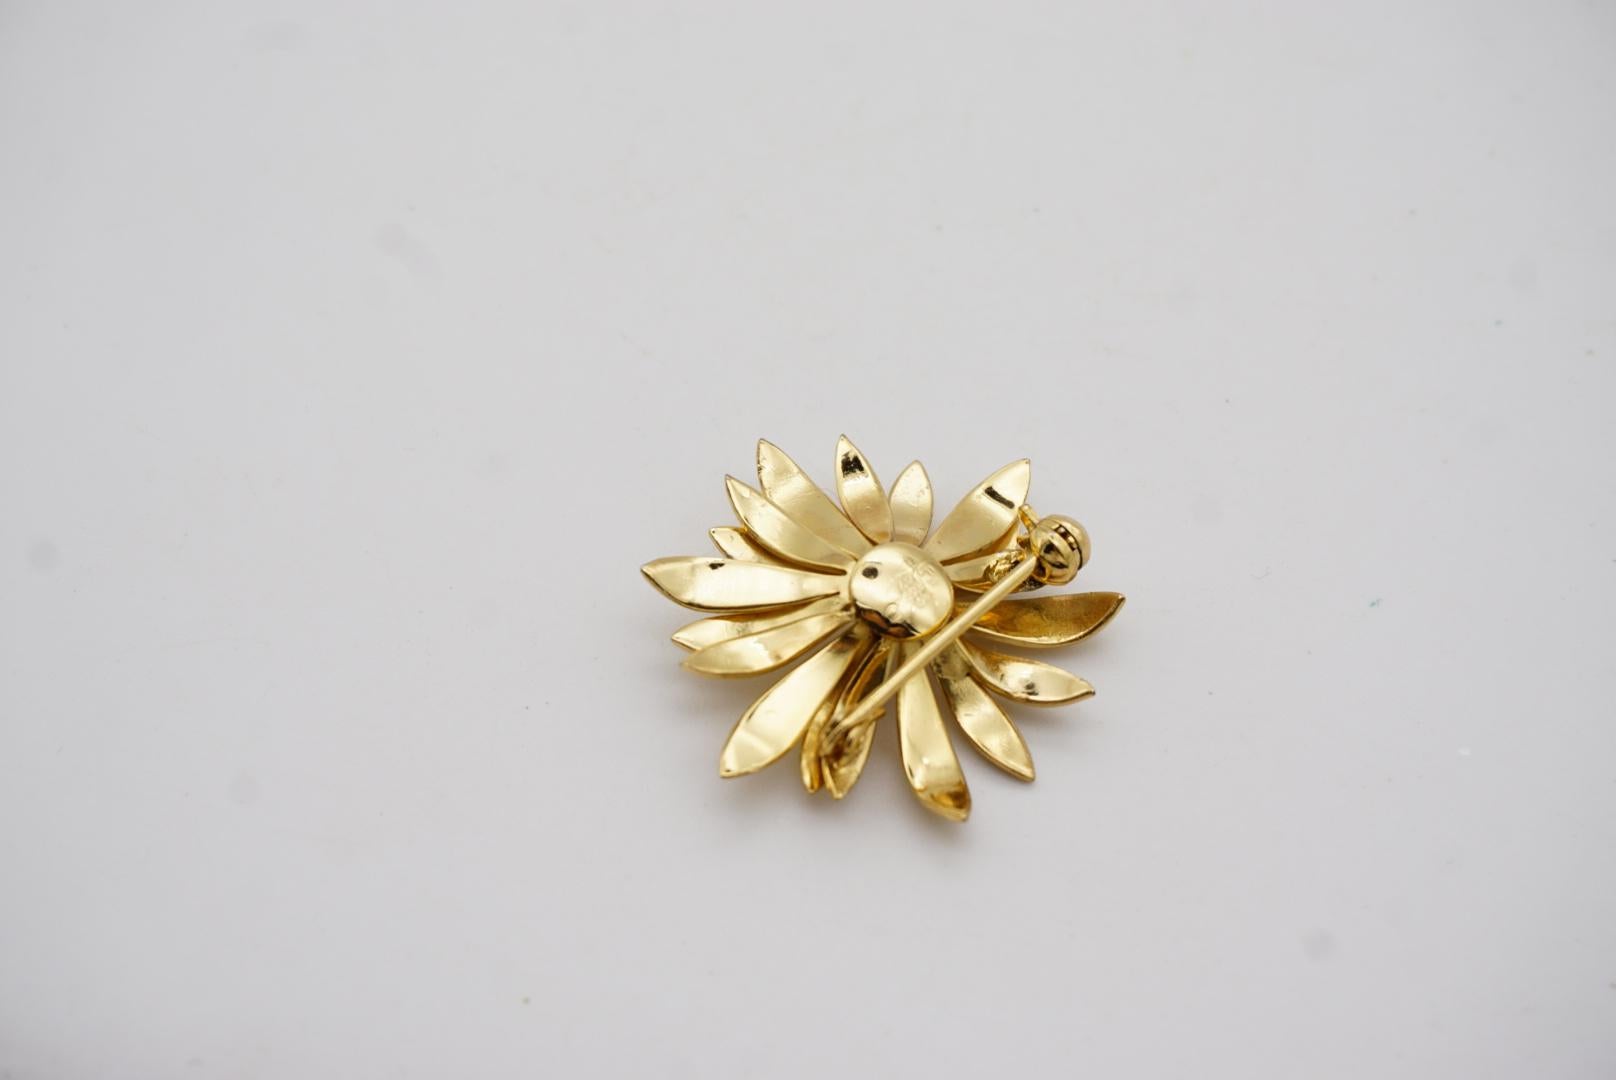 Christian Dior GROSSE 1967 Vintage Daisy Flower Blossom White Pearl Gold Brooch For Sale 6